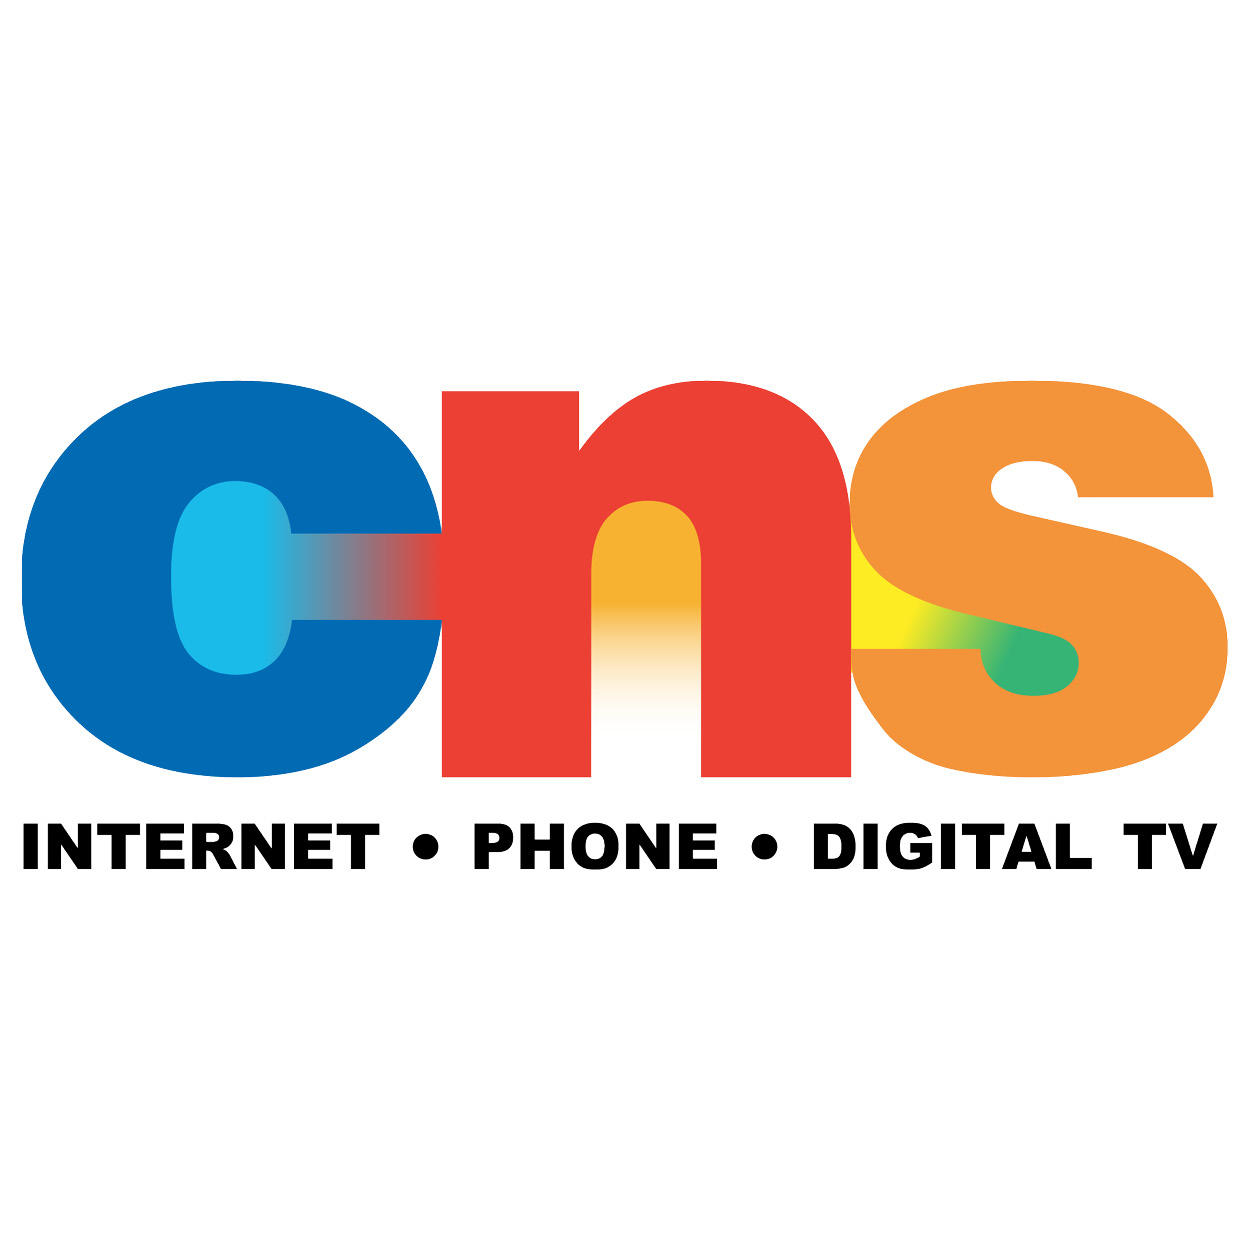 Photo for CNS CUSTOMERS IMPACTED BY LARGE TELEPHONE OUTAGE IN GEORGIA